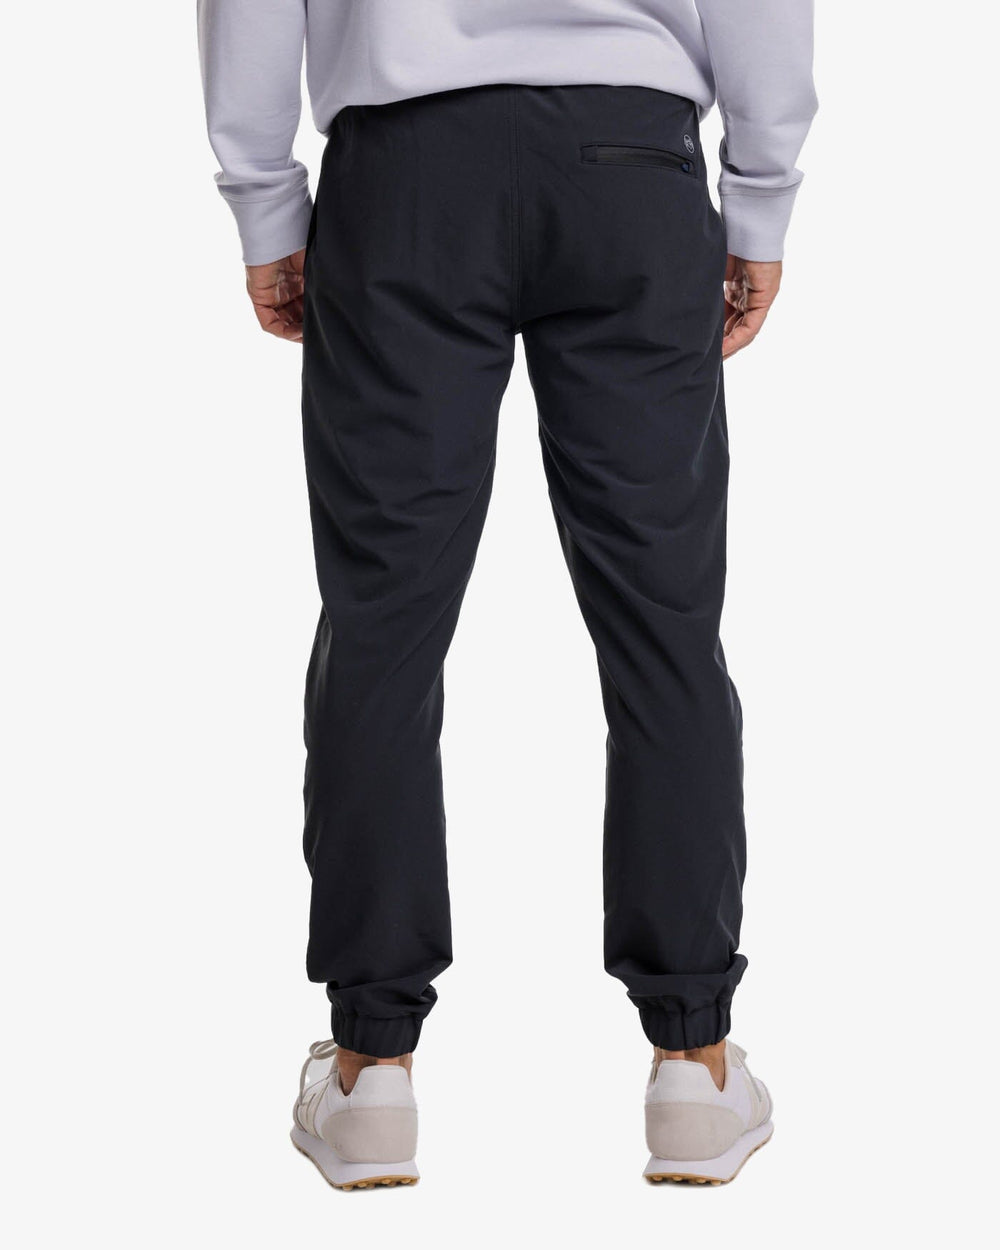 Simply Cozy Navy Blue Joggers